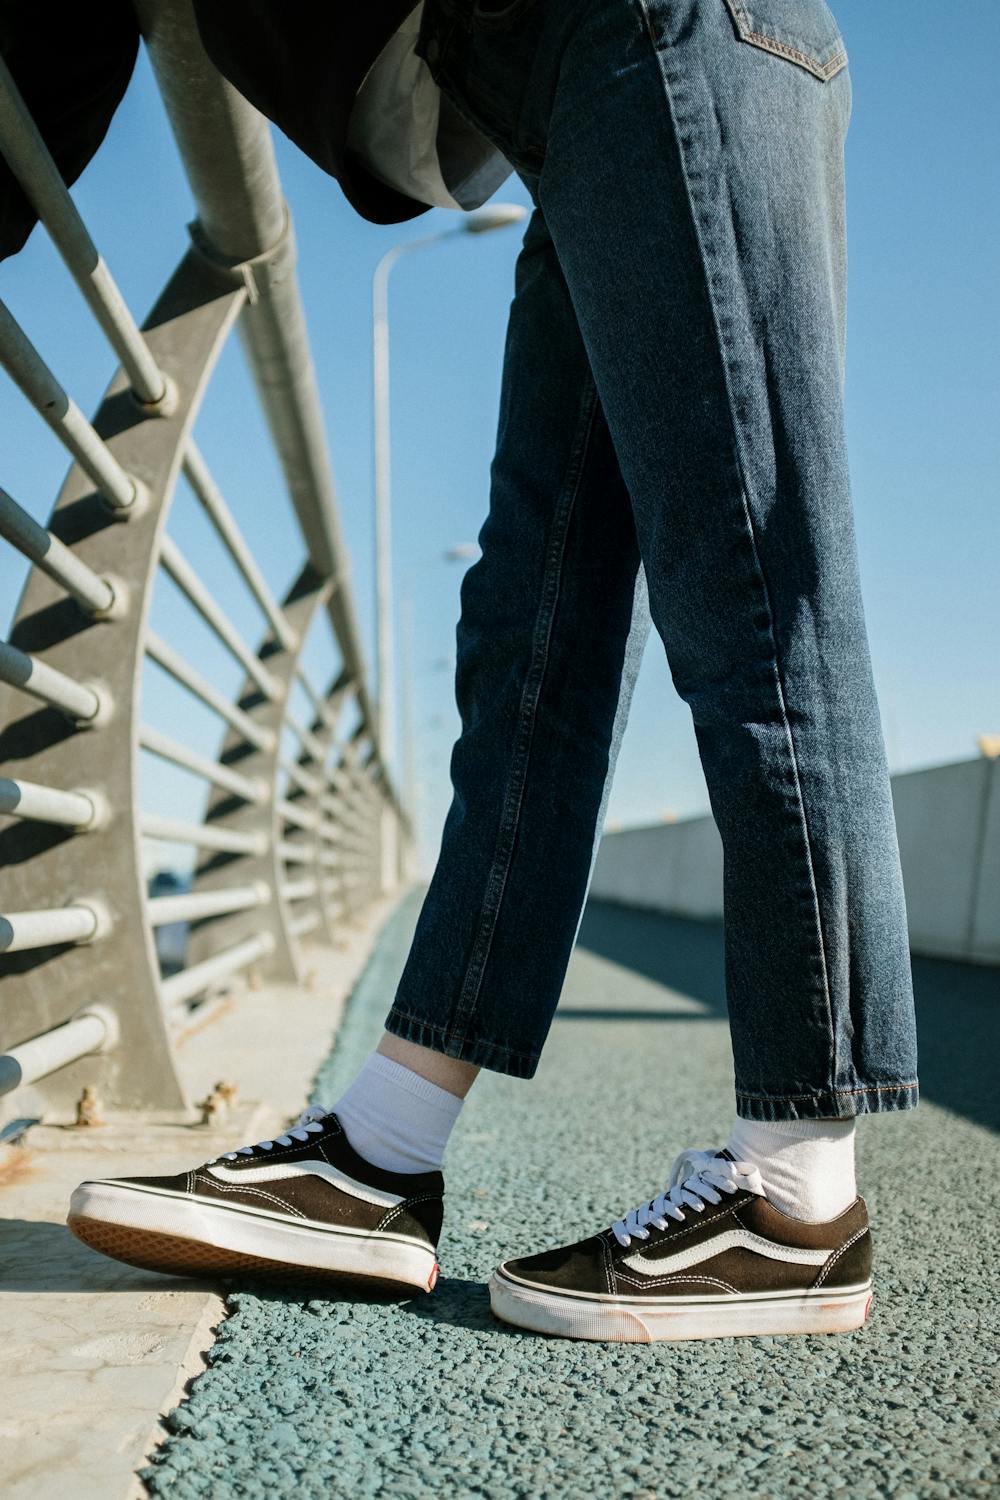 Person in Blue Denim Jeans and Black and White Sneakers Standing on ...